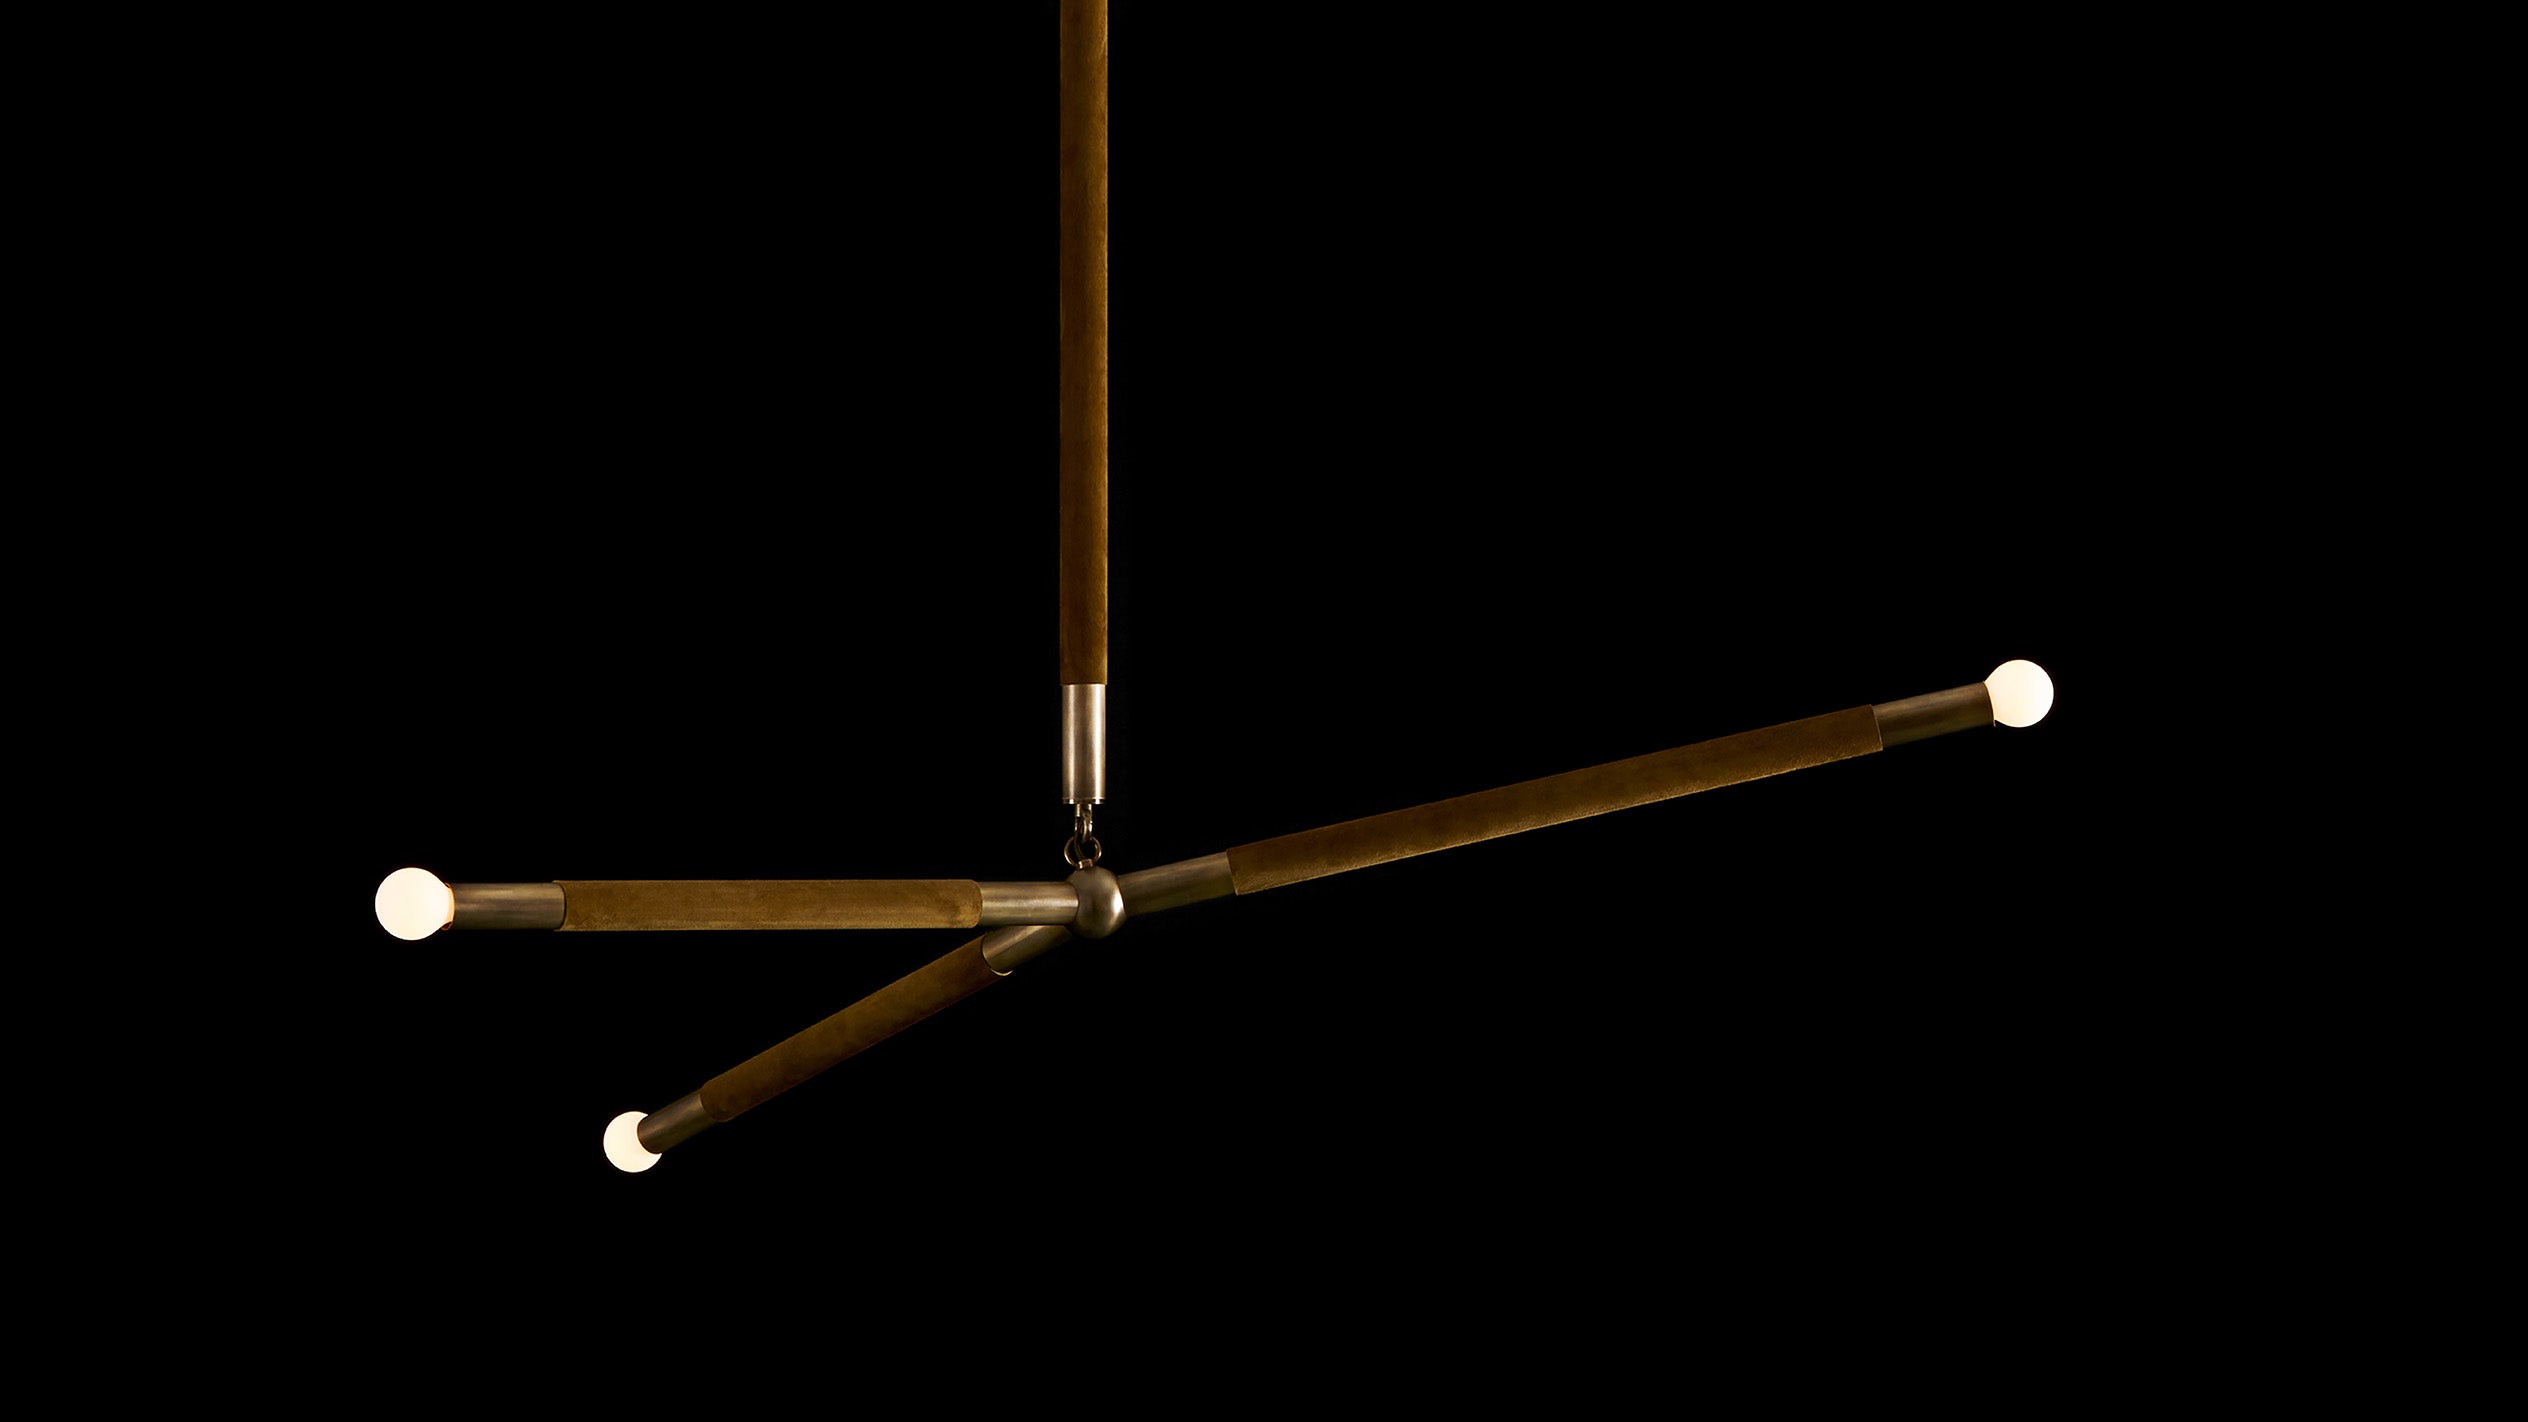 ARROW ceiling pendant in Aged Brass finish with Bronze Suede hanging against a black background.